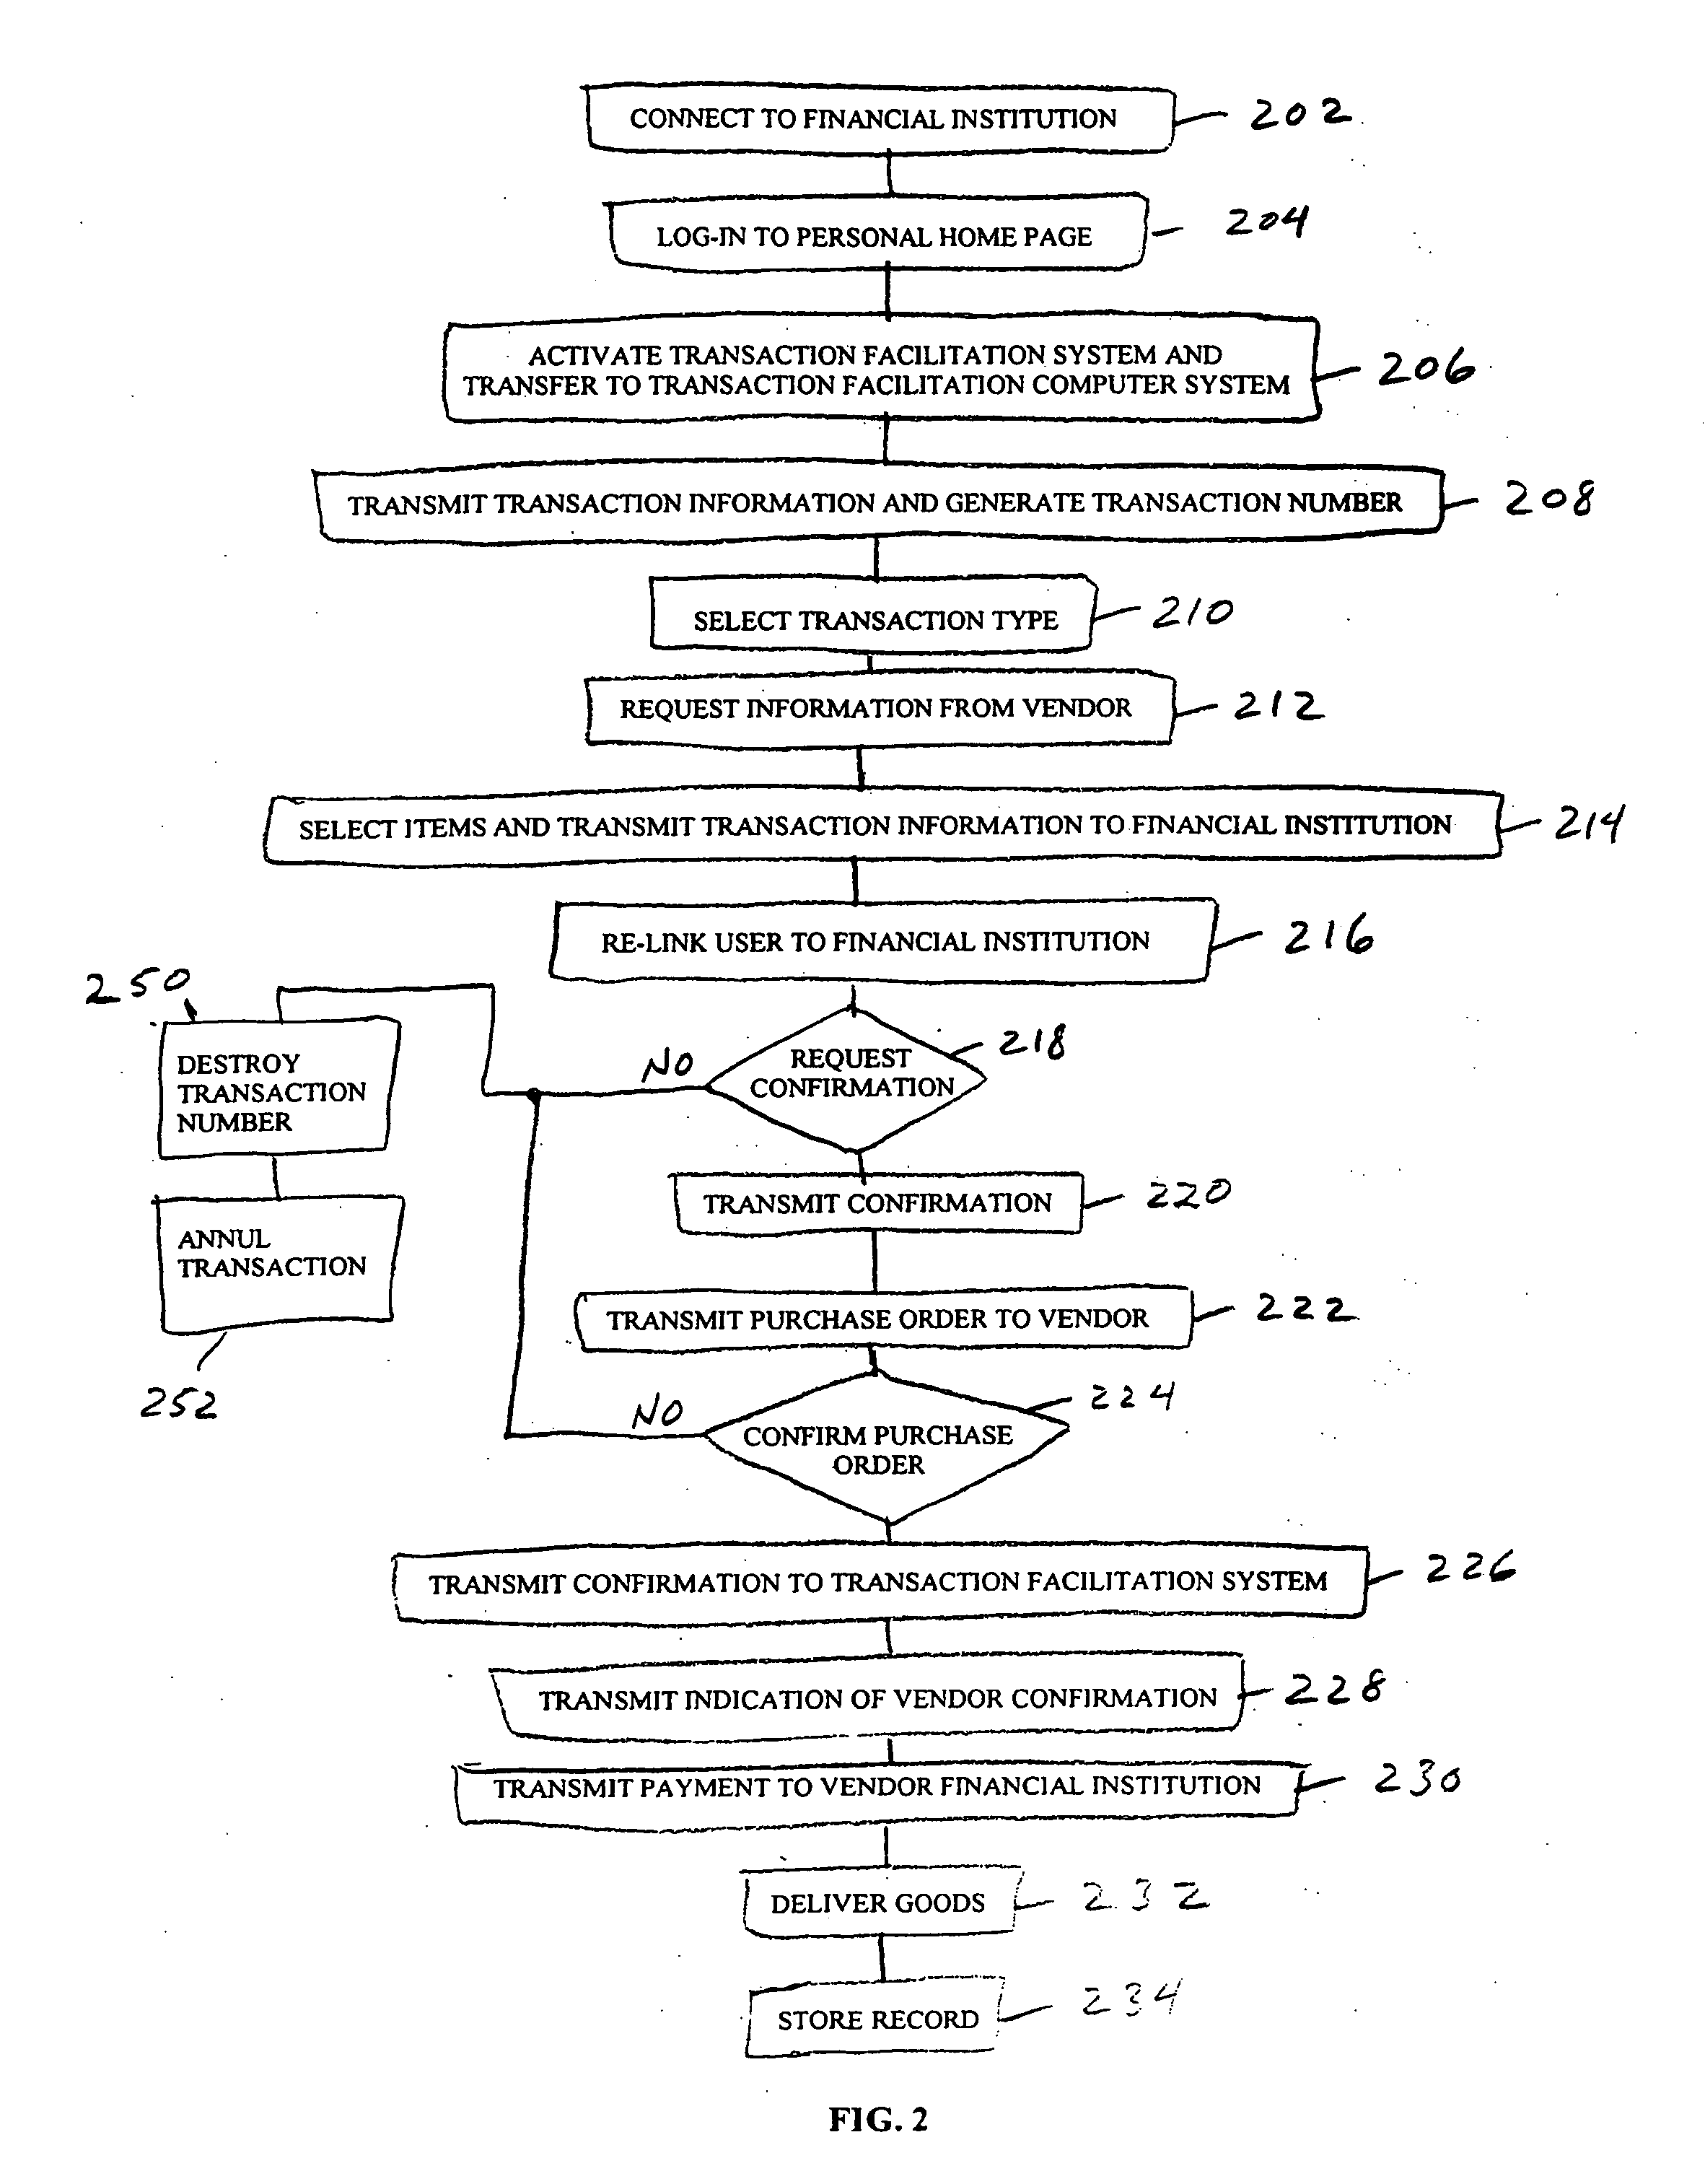 System and method for facilitating secure transactions over communication networks